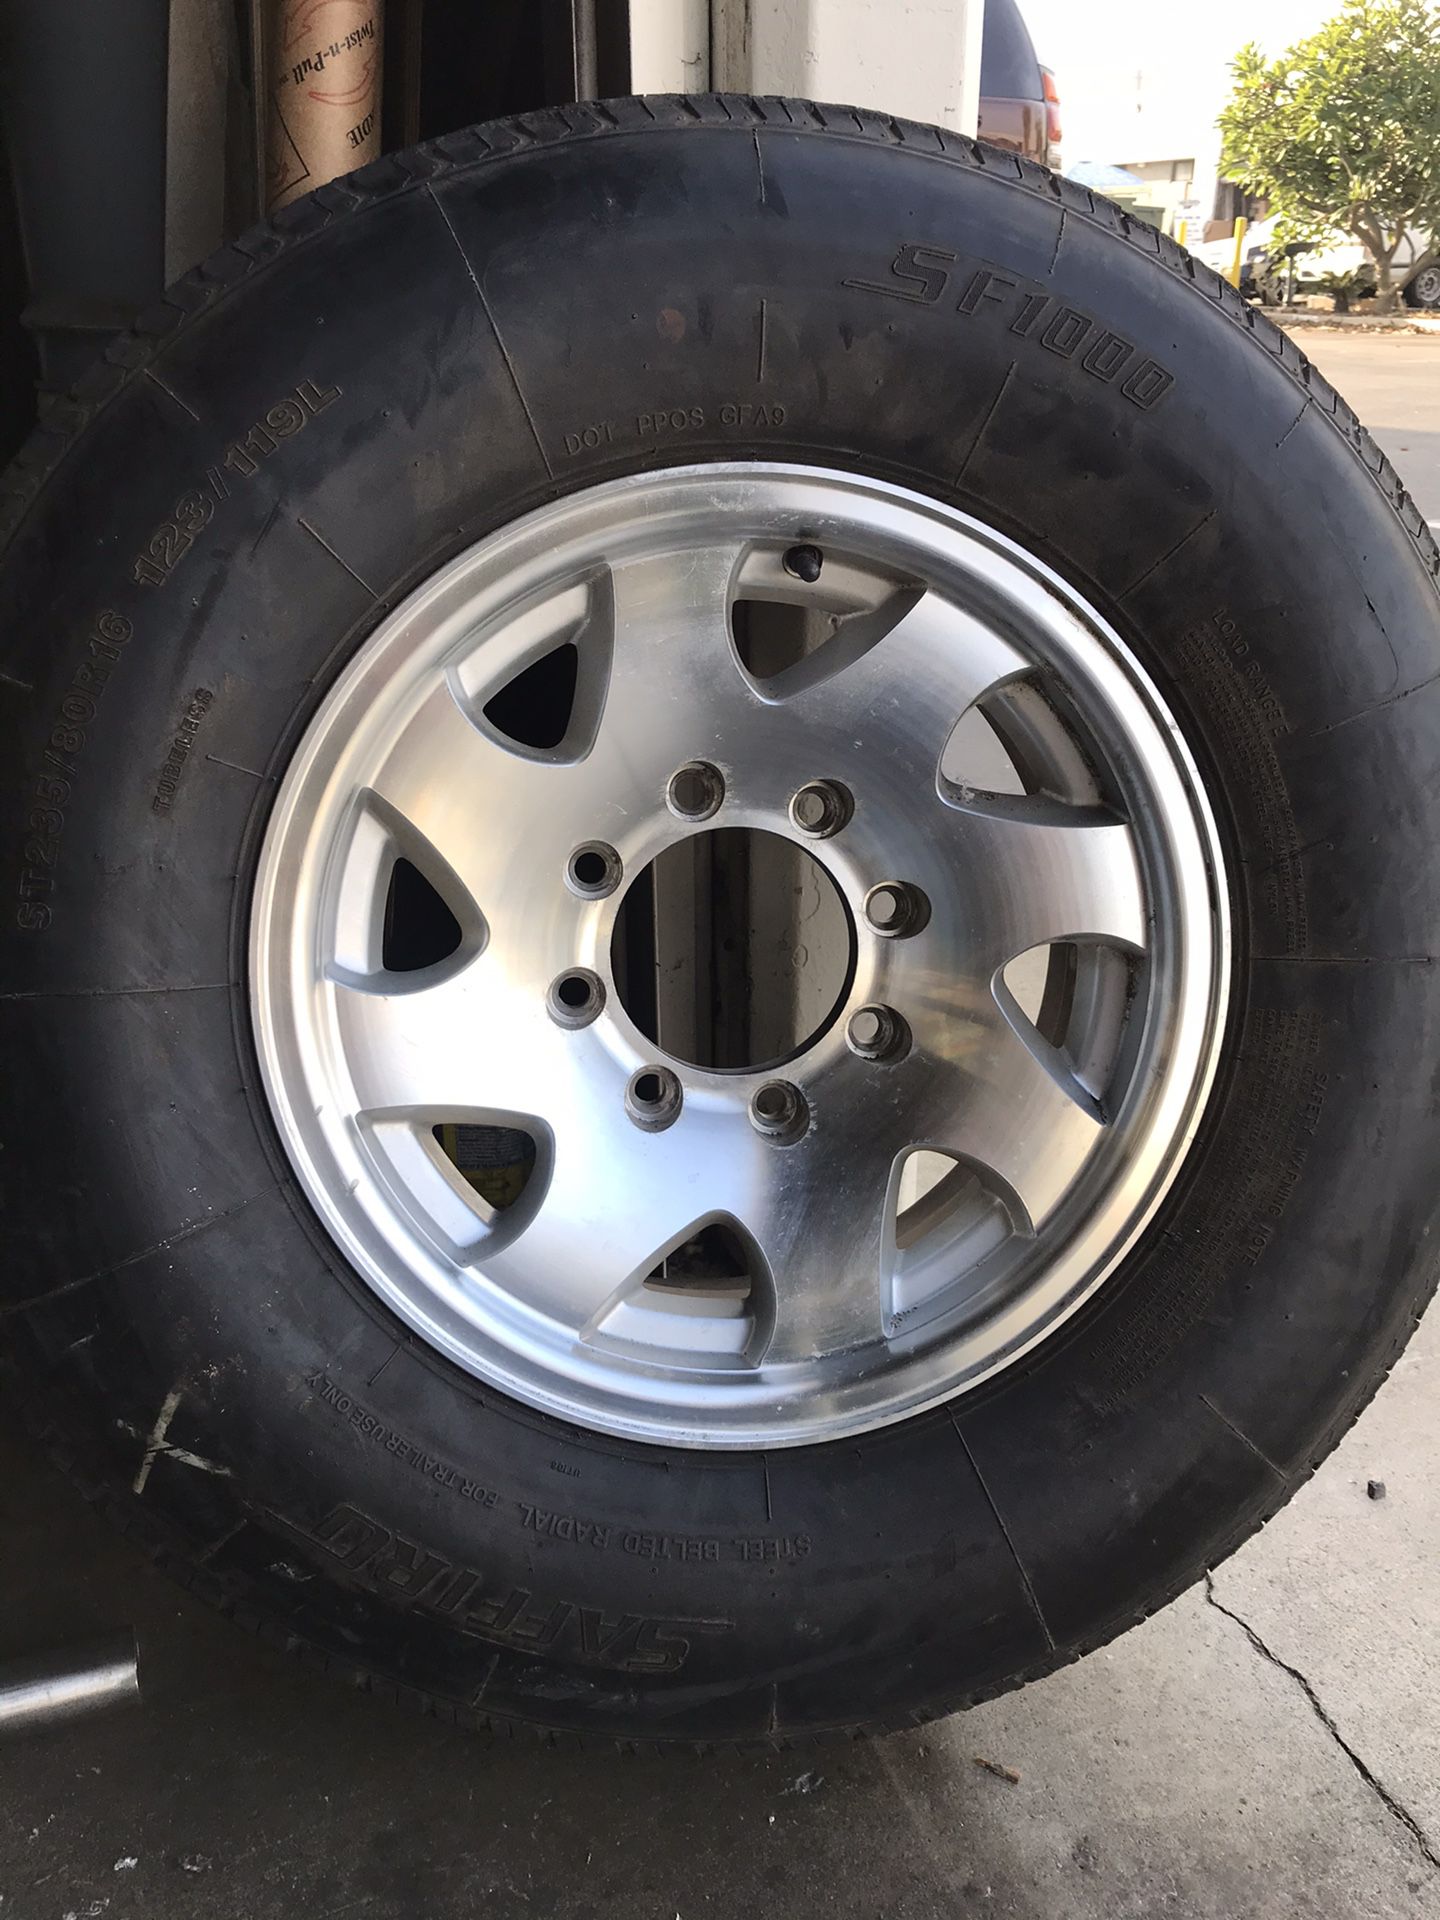 16” Trailer Rims And Tires